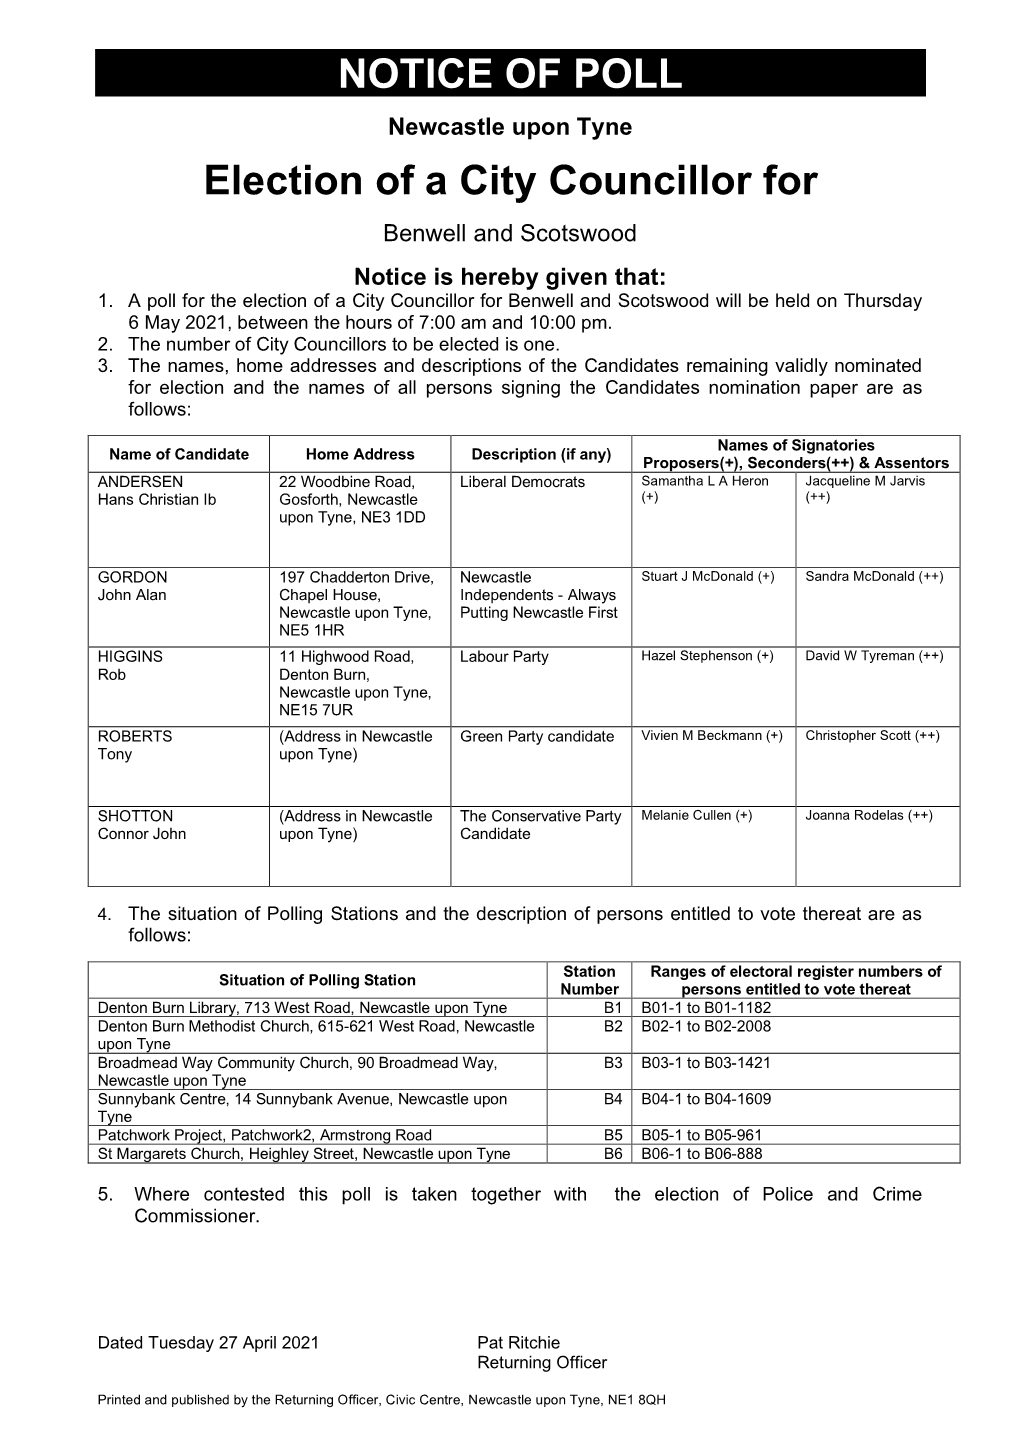 NOTICE of POLL Election of a City Councillor